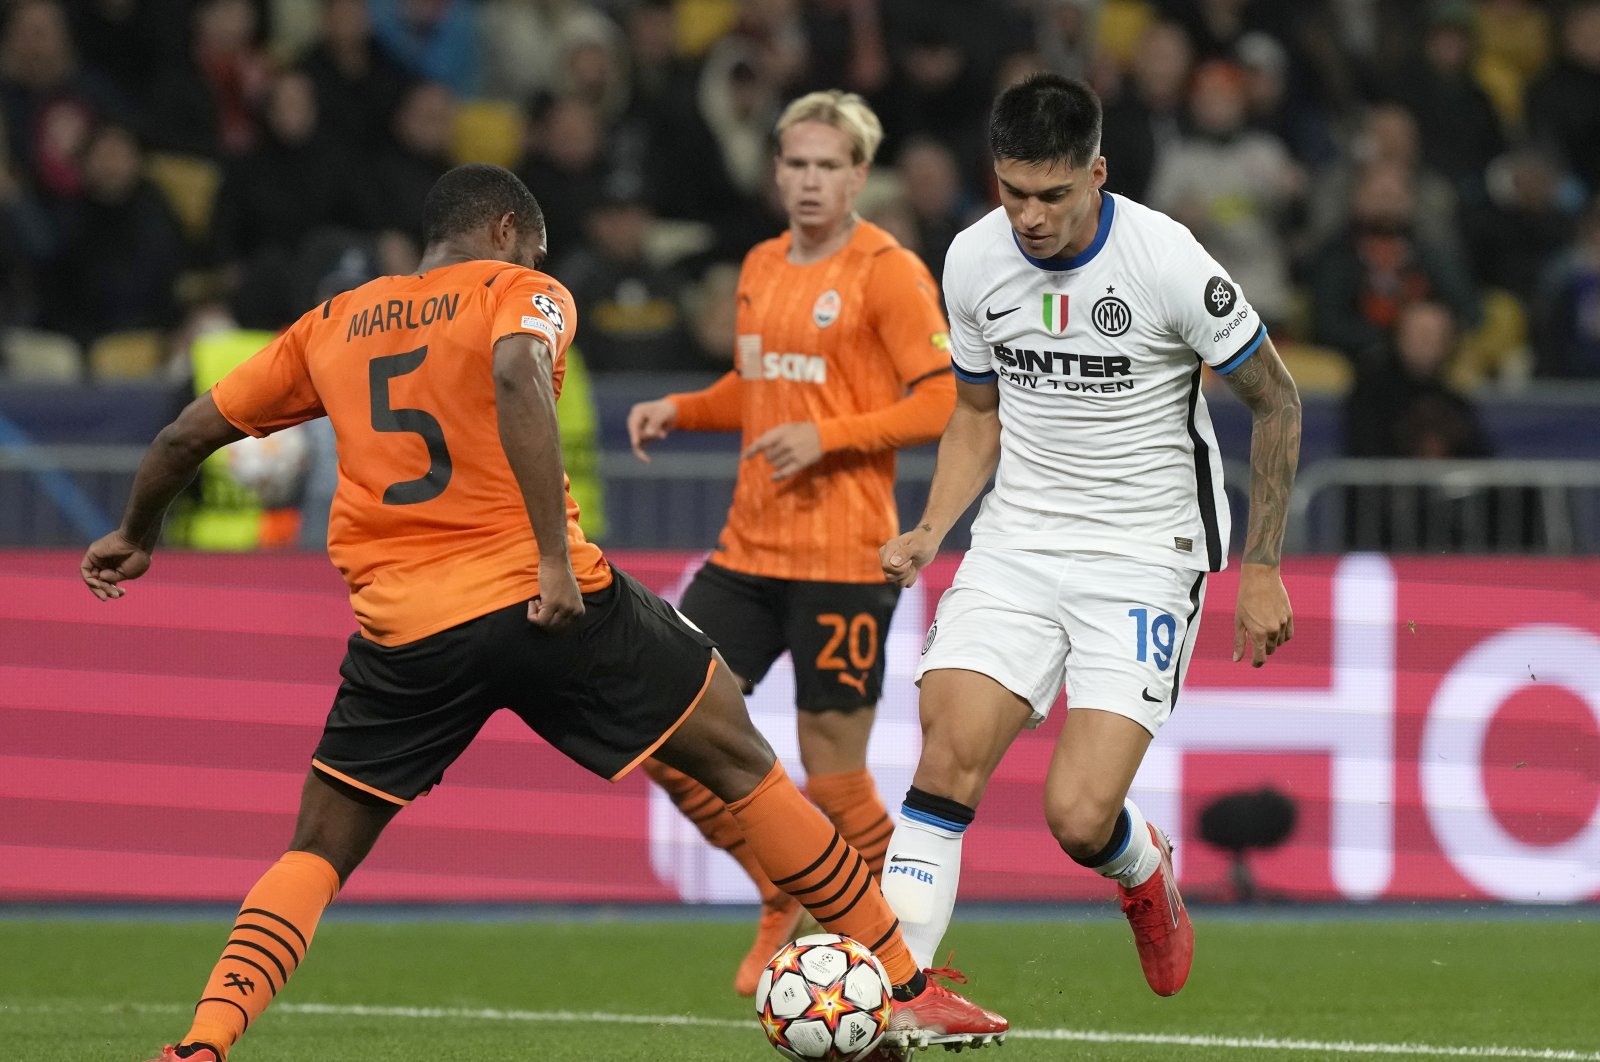 Shakhtar's Marlon (L) challenges for the ball with Inter Milan's Joaquin Correa during a Champions League match at the Olimpiyskiy Stadium in Kyiv, Ukraine, Sept. 28, 2021. (AP Photo)